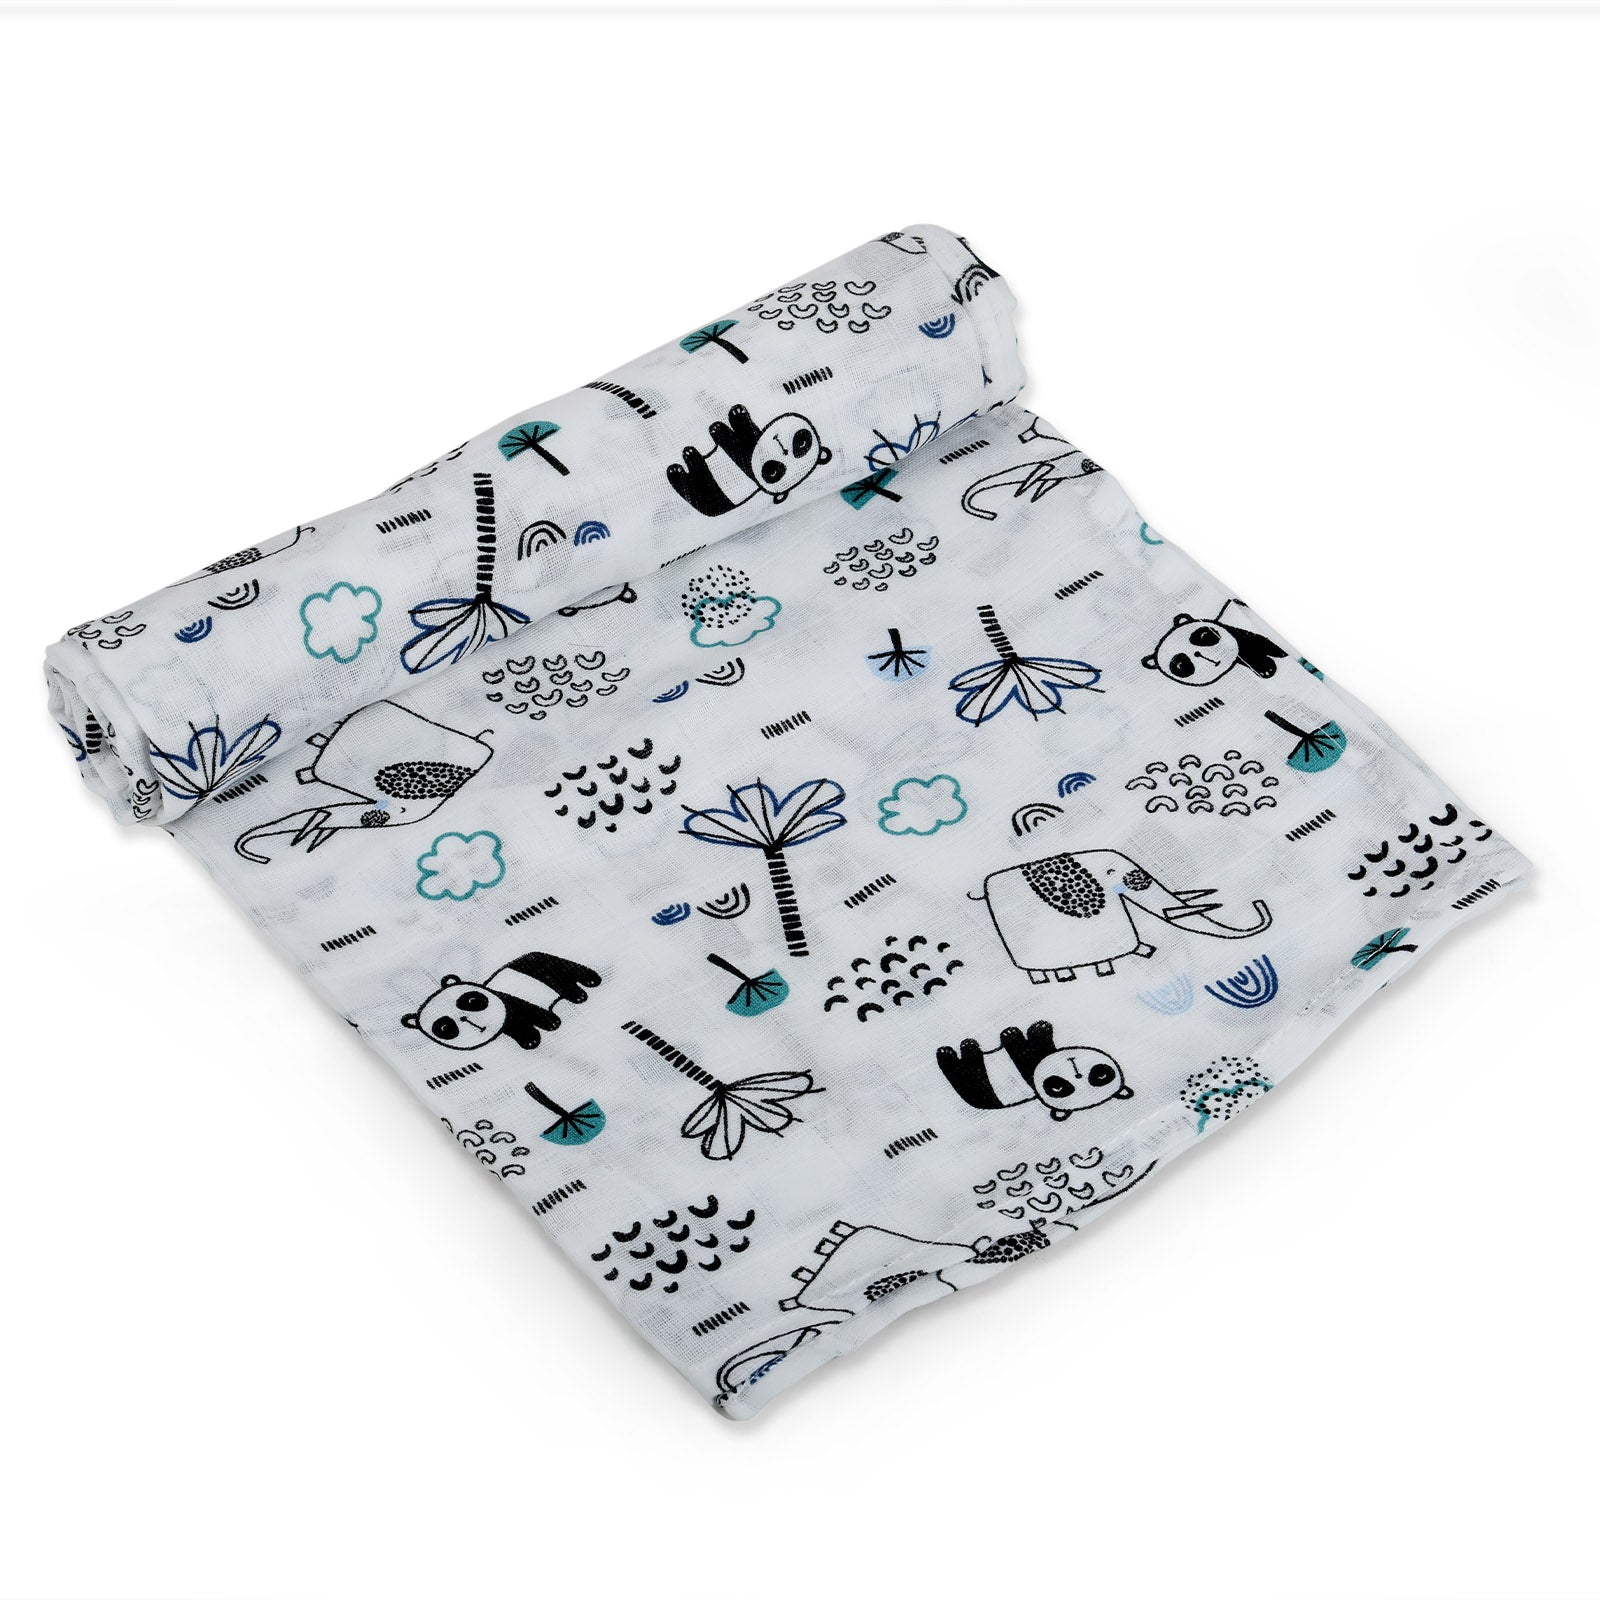 swaddle muslin clothe,100% cotton, wrapping clothe for newborn baby, super soft clothes for new born babies, design of cute panda on swaddle for babies